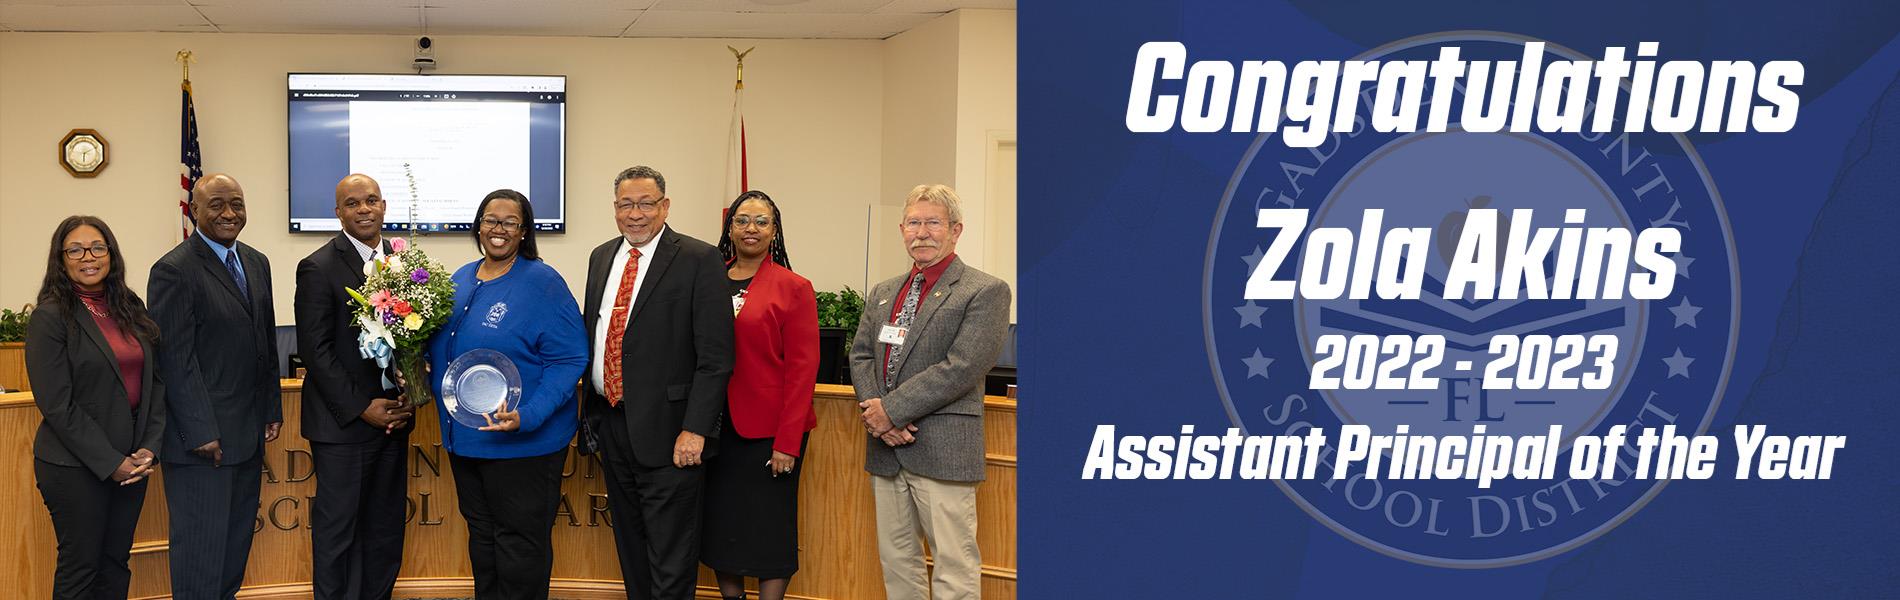 Congratulations Assistant Principal of the Year: Zola Akins